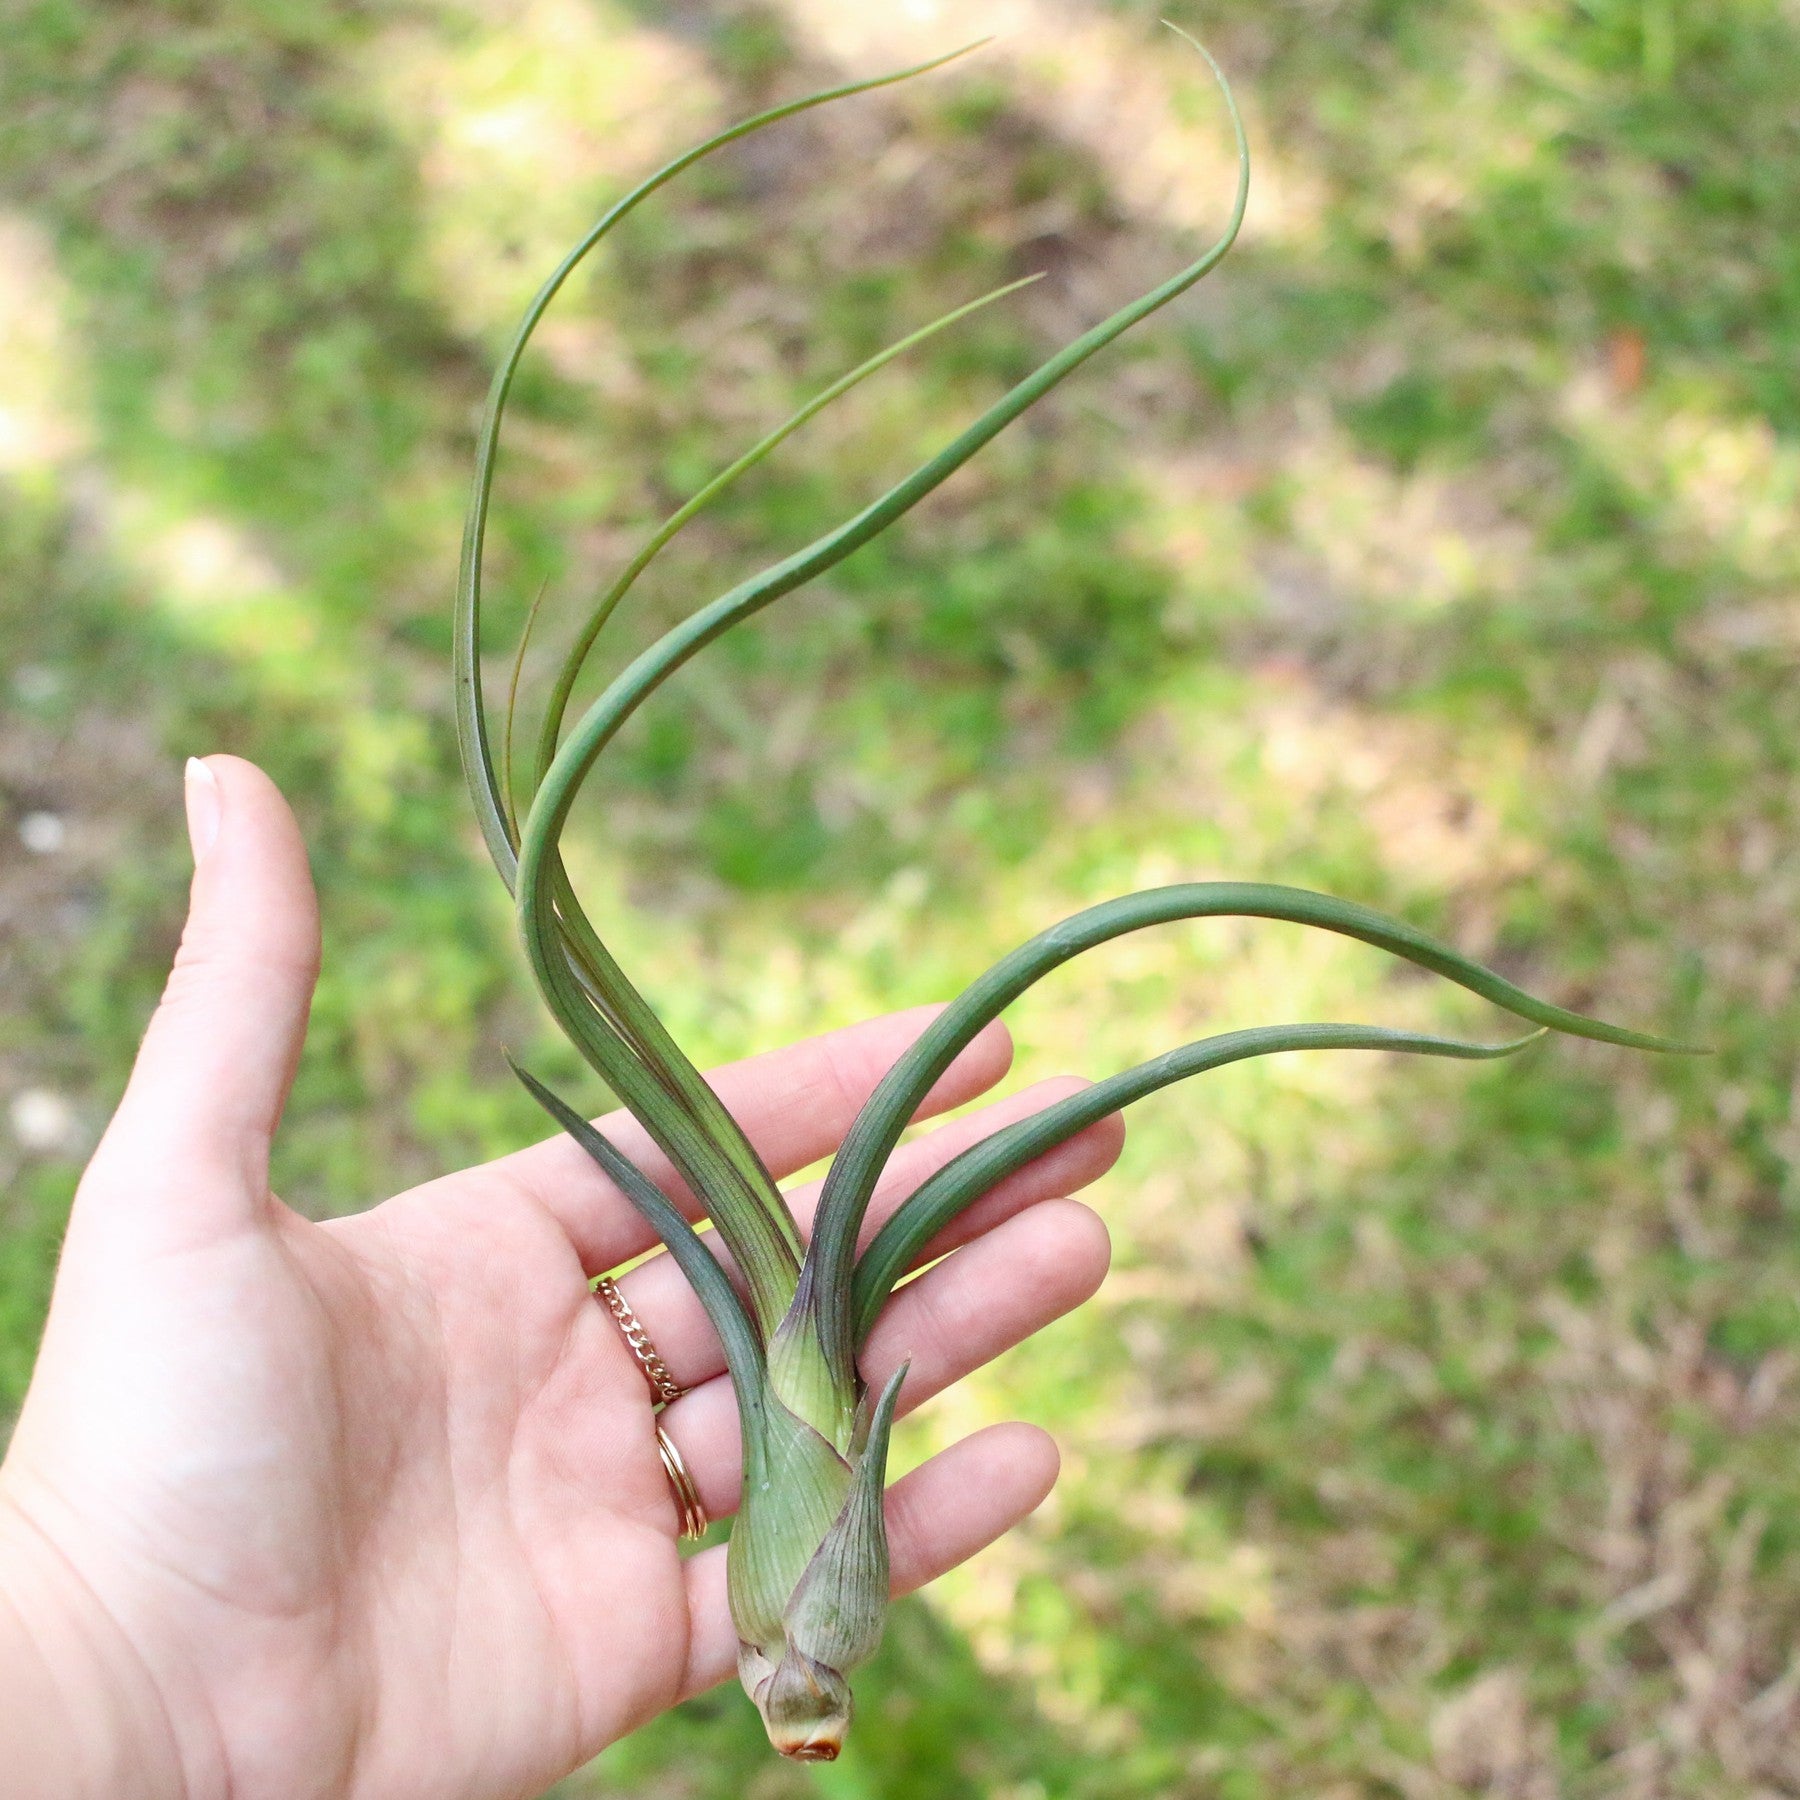 SALE - Tillandsia Baileyi Air Plants - Set of 5 or 10 - 50% Off-airplant-The Succulent Source